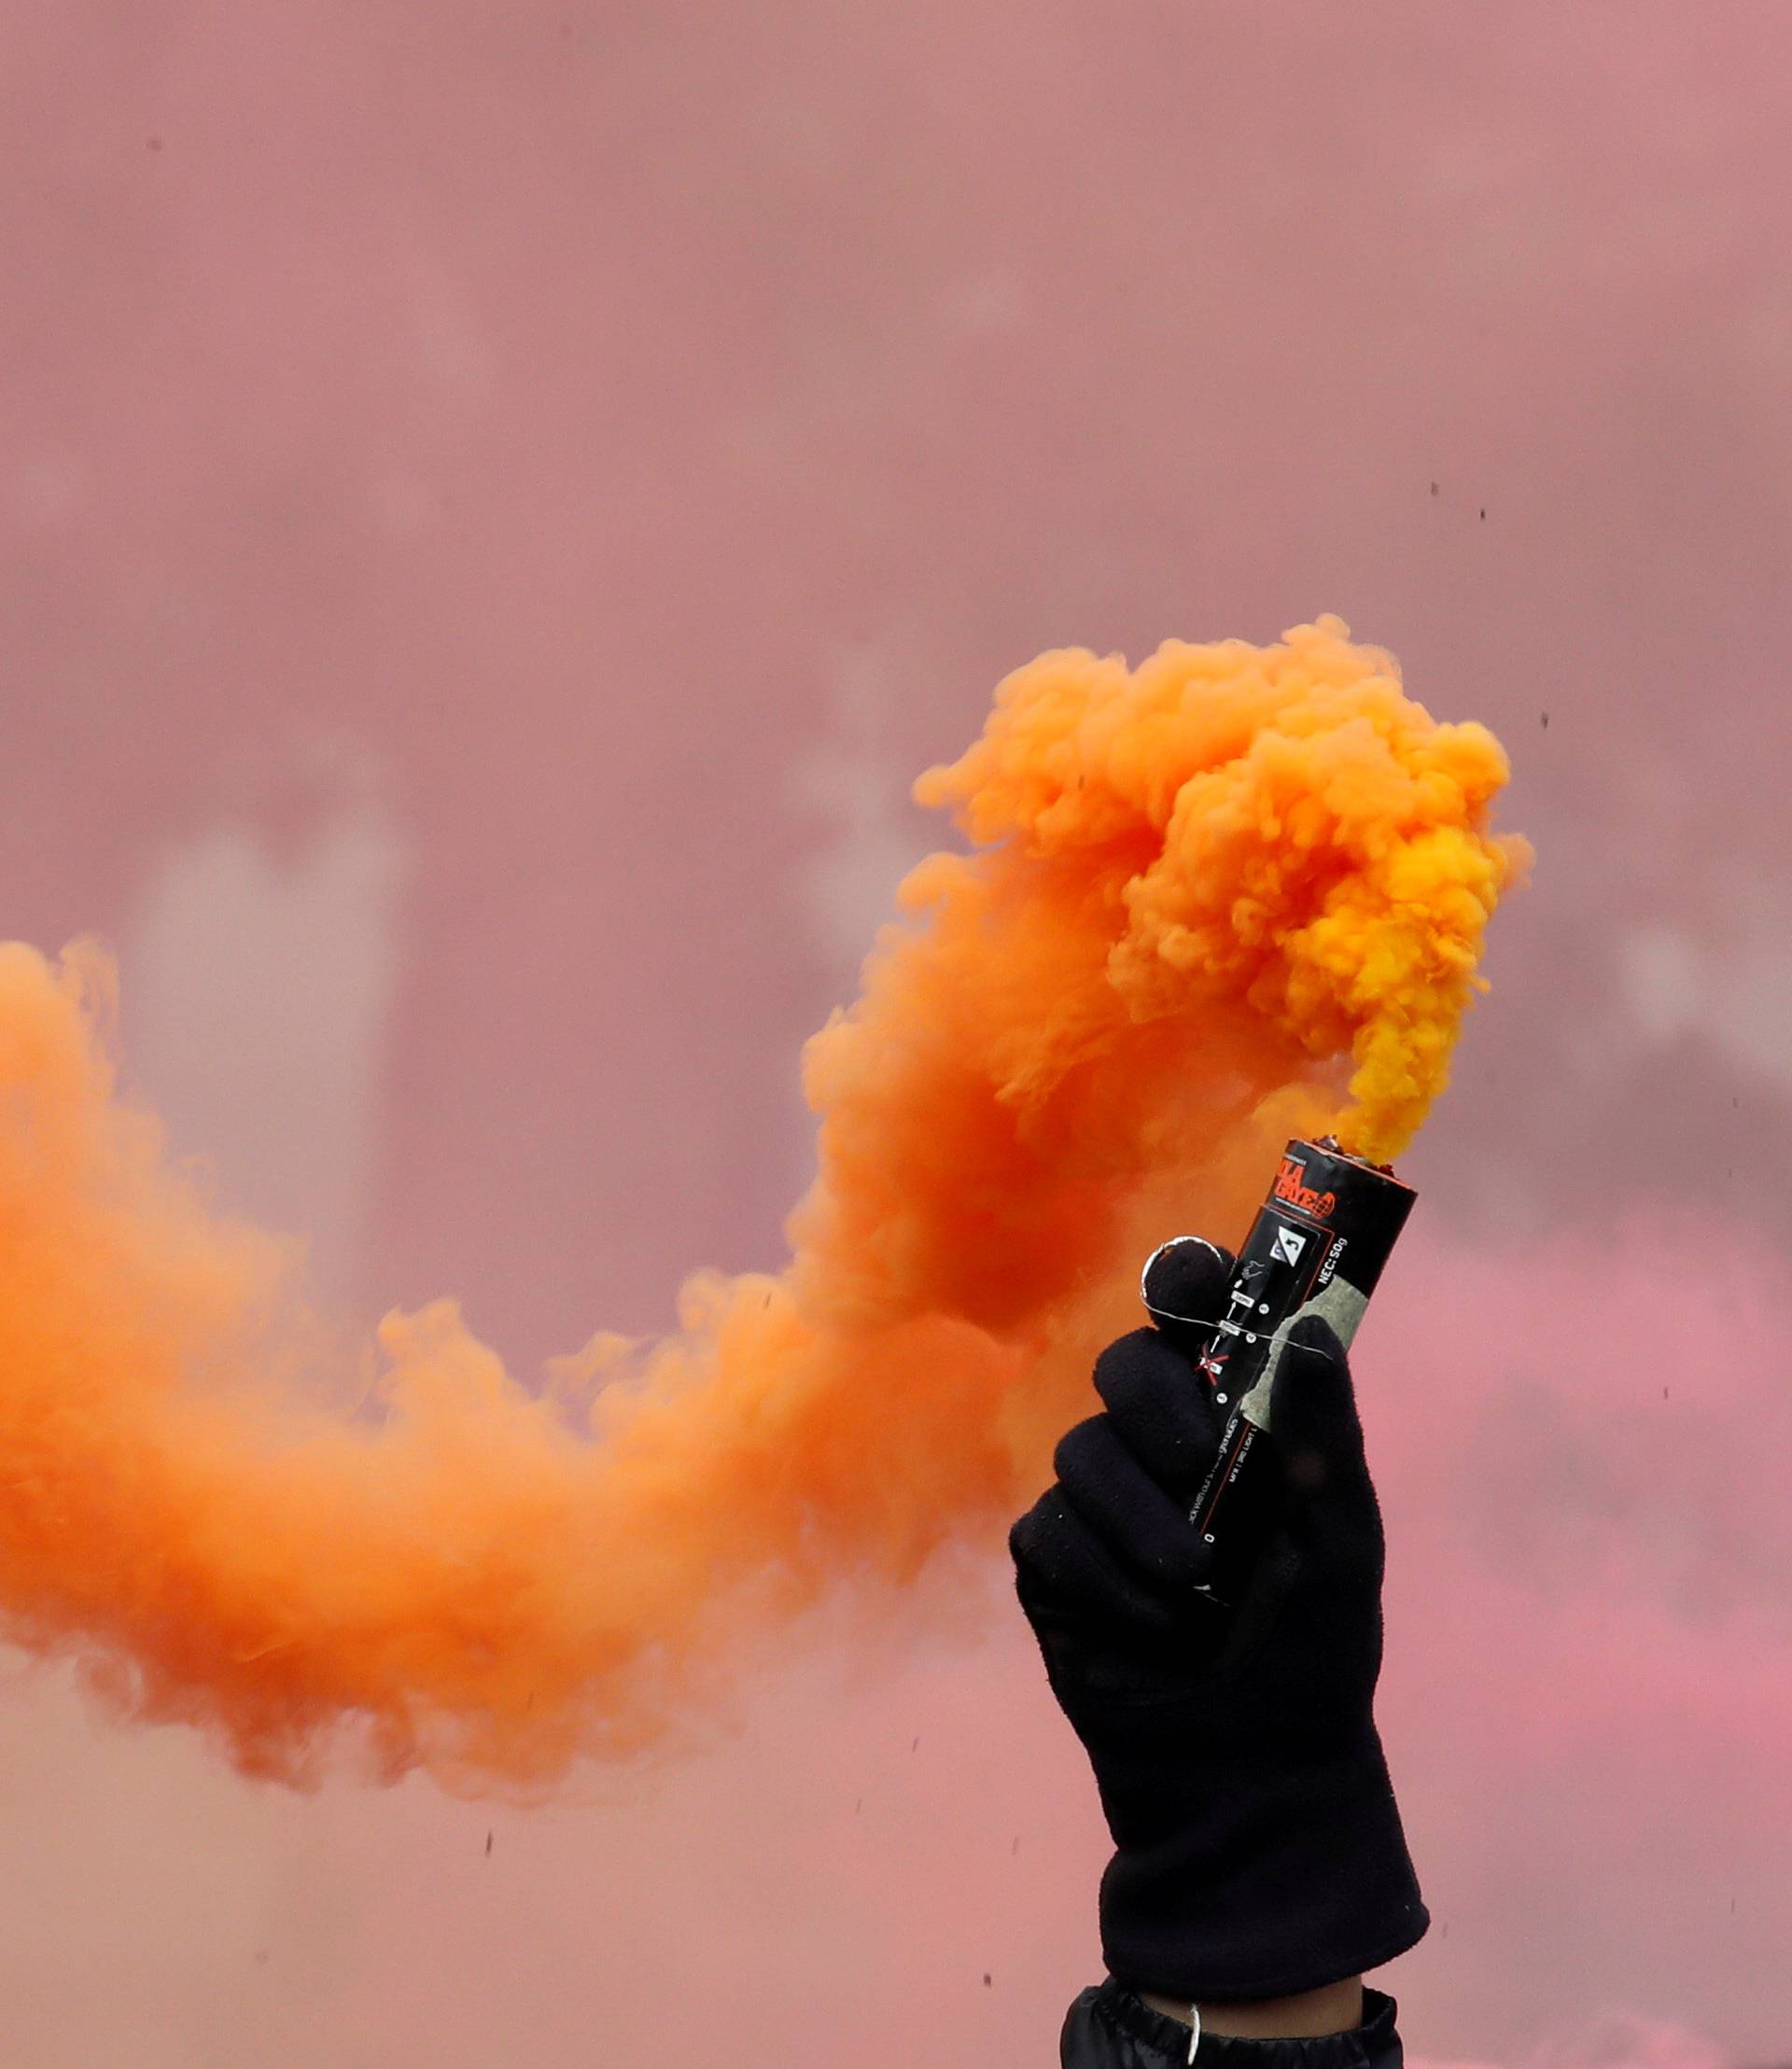 Protester holds a smoke safety flare during the May Day labour union march in Paris